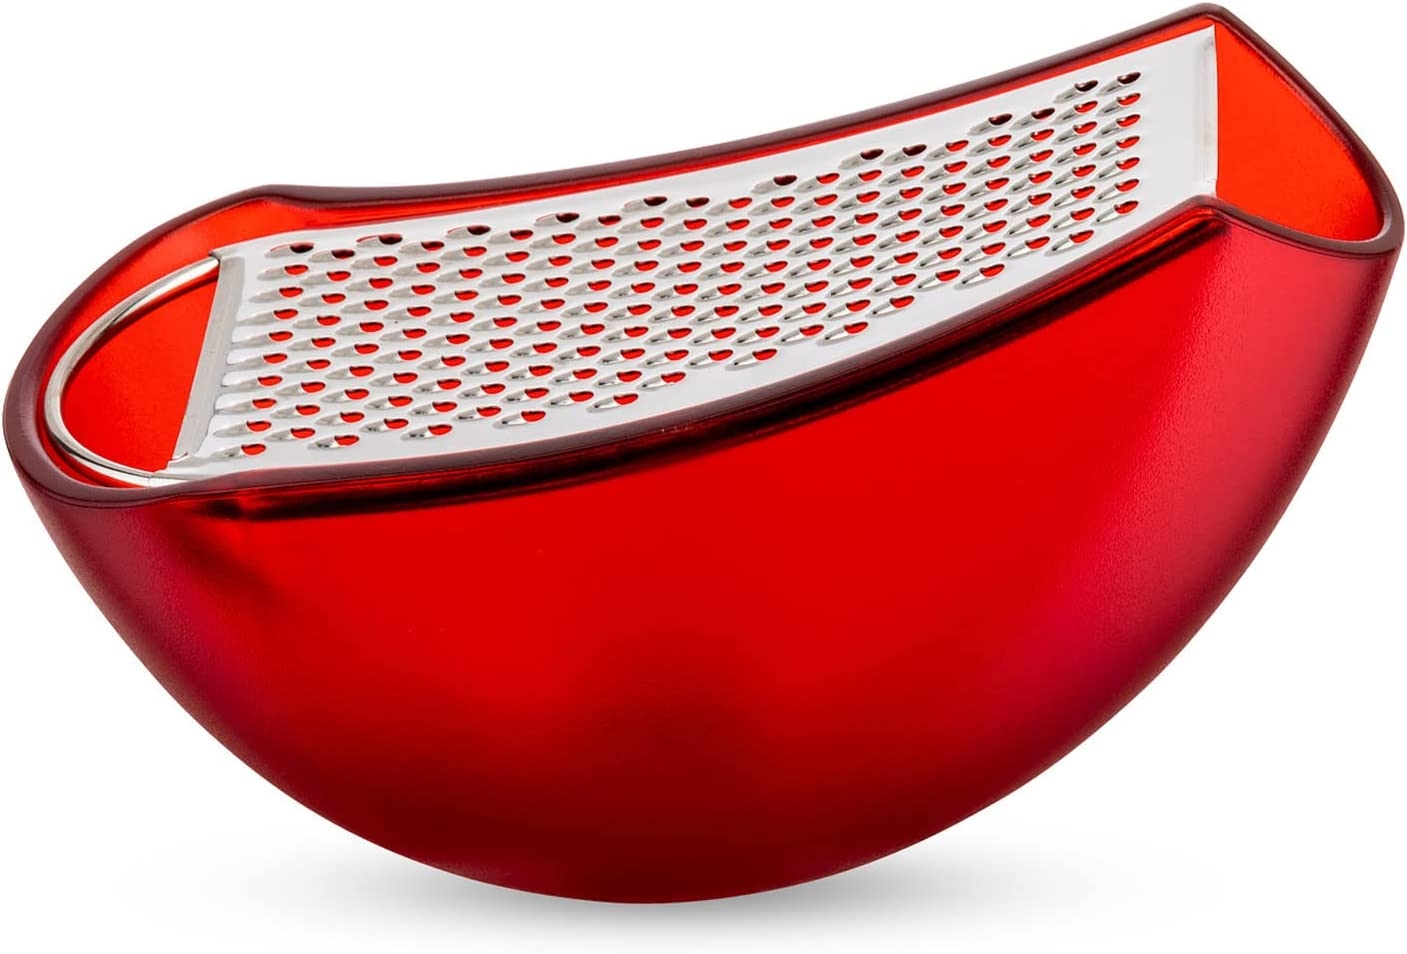 A di Alessi Parmenide Cheese Grater, Red Import To Shop ×Product customization General Description Gallery Reviews Variations